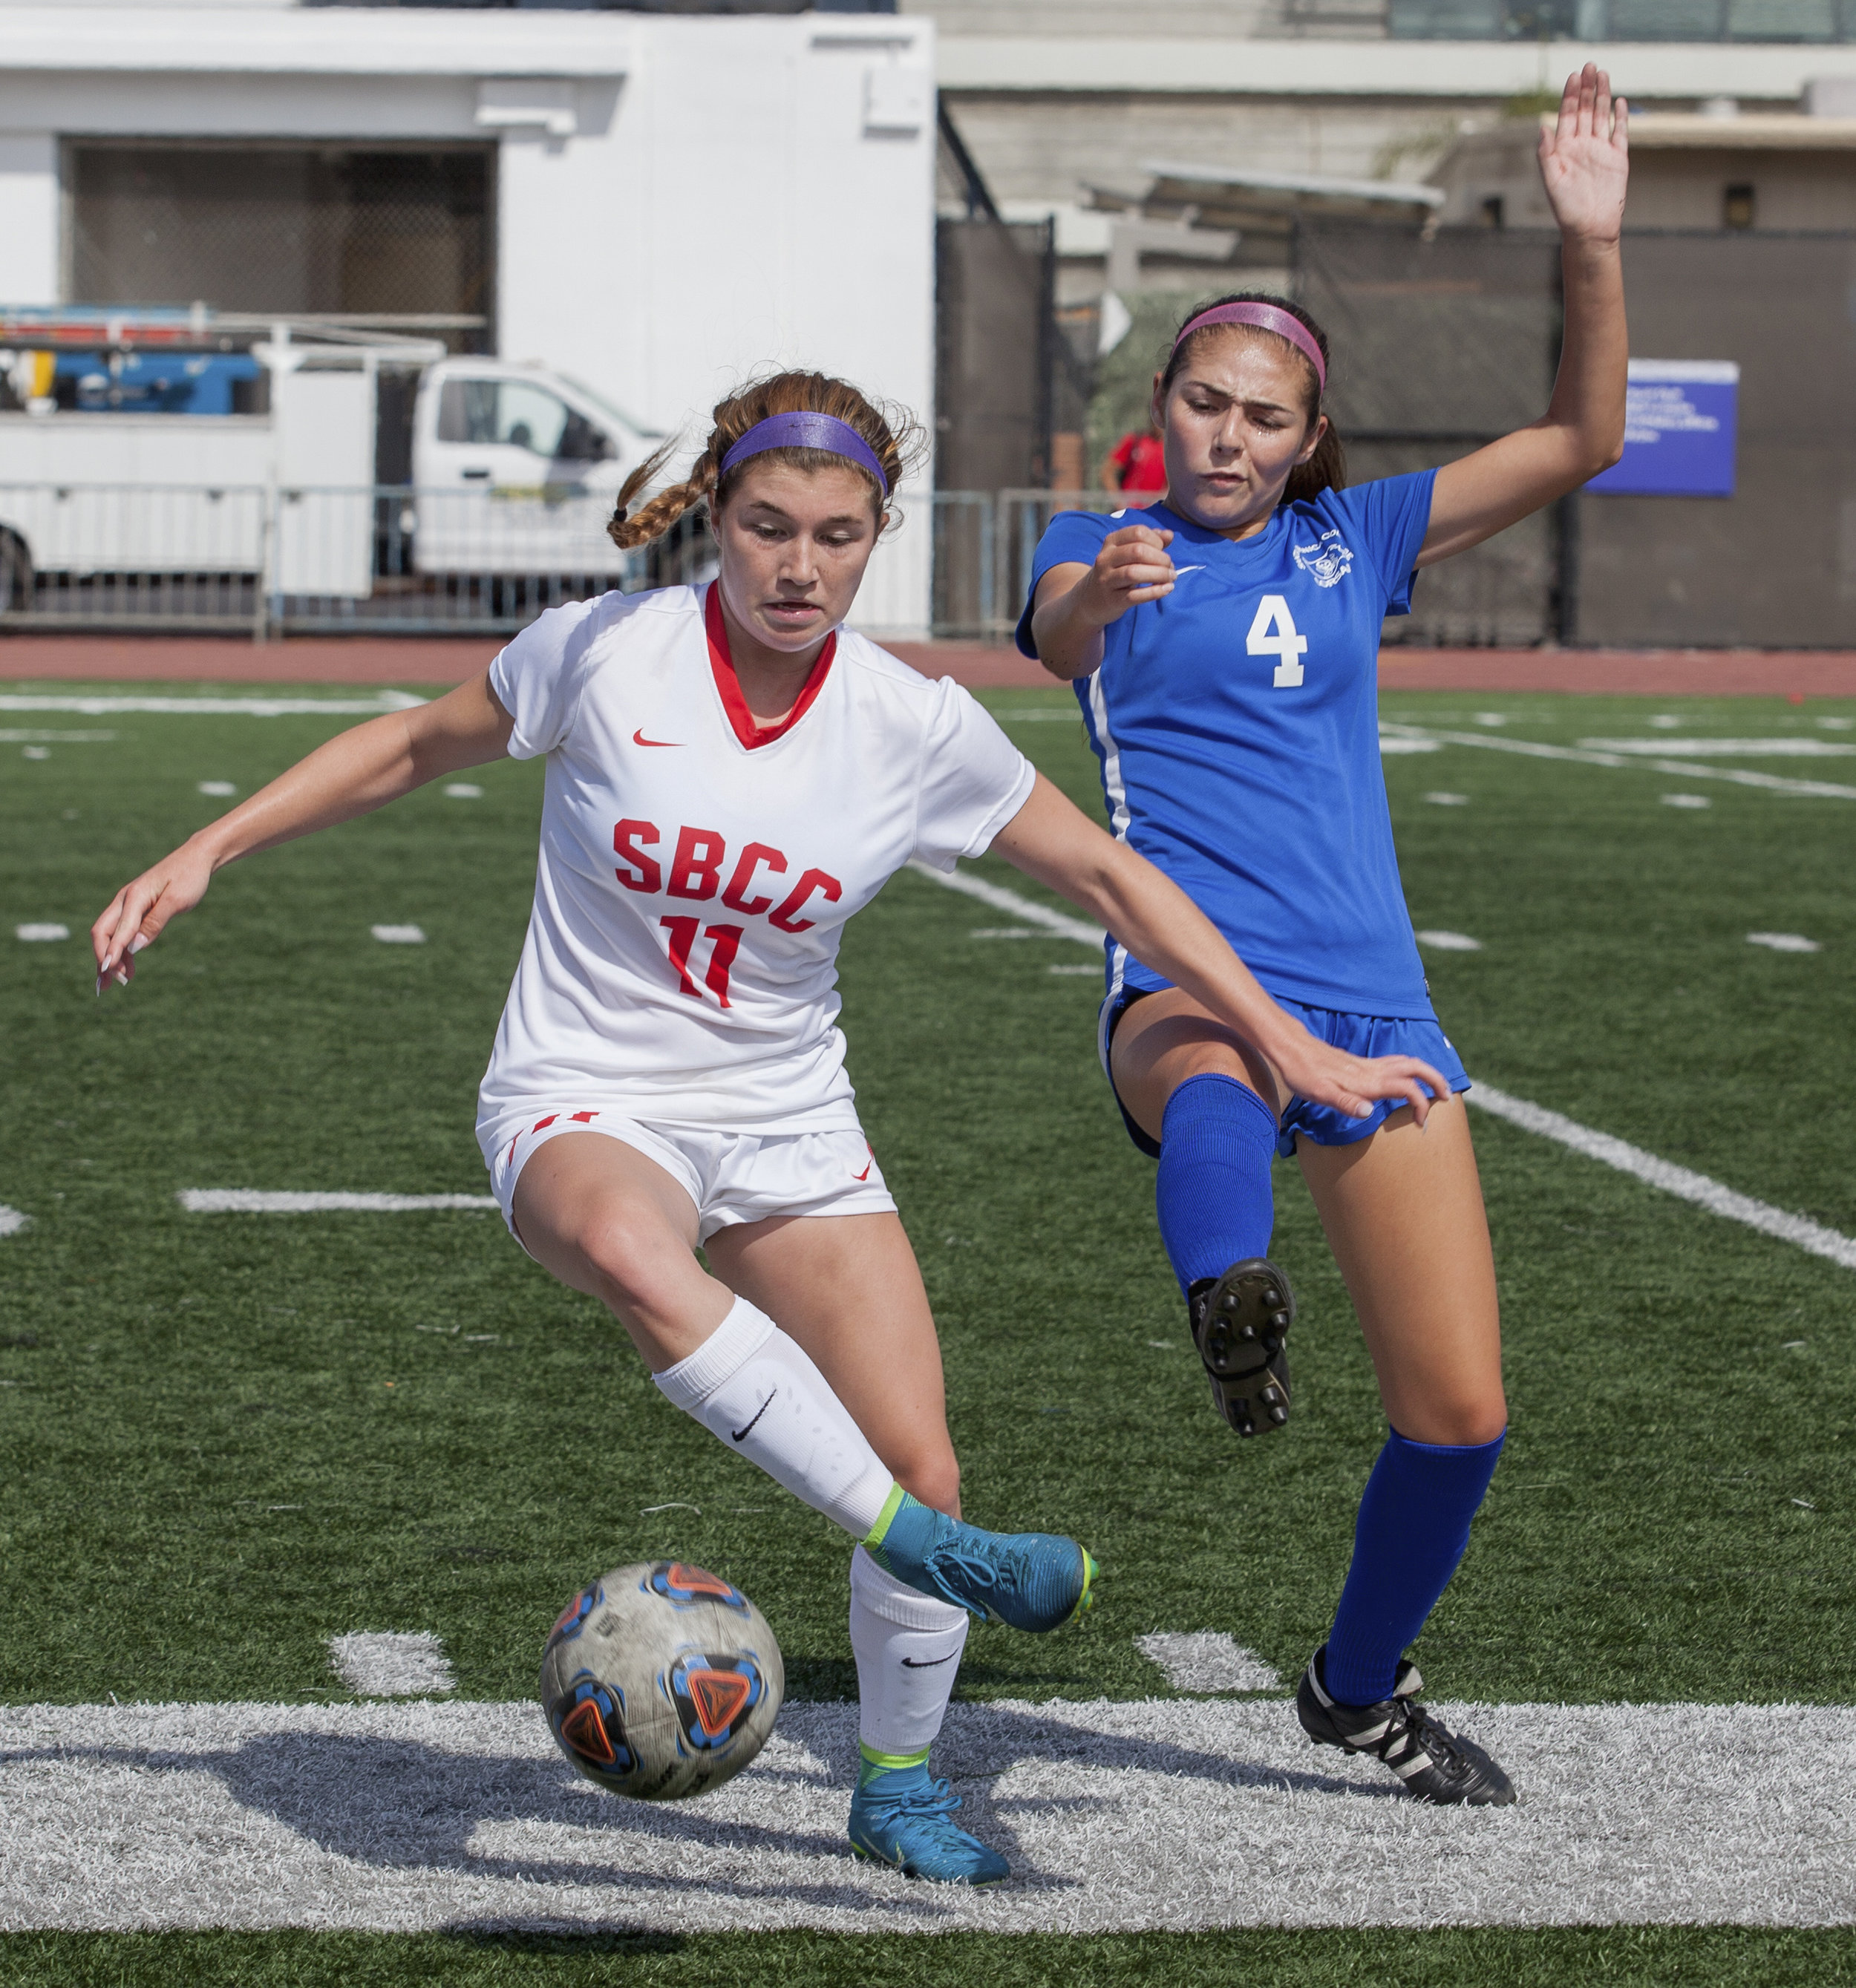  Santa Monica Corsair Antoinette Saldana (6)(right) fights for possession of the ball against Santa Barbara Vaqueros Amber Mulligan (13)(left) during a match on the Corsair Field at Field at Santa Monica College, Calif. on October 3rd, 2017. The Cors